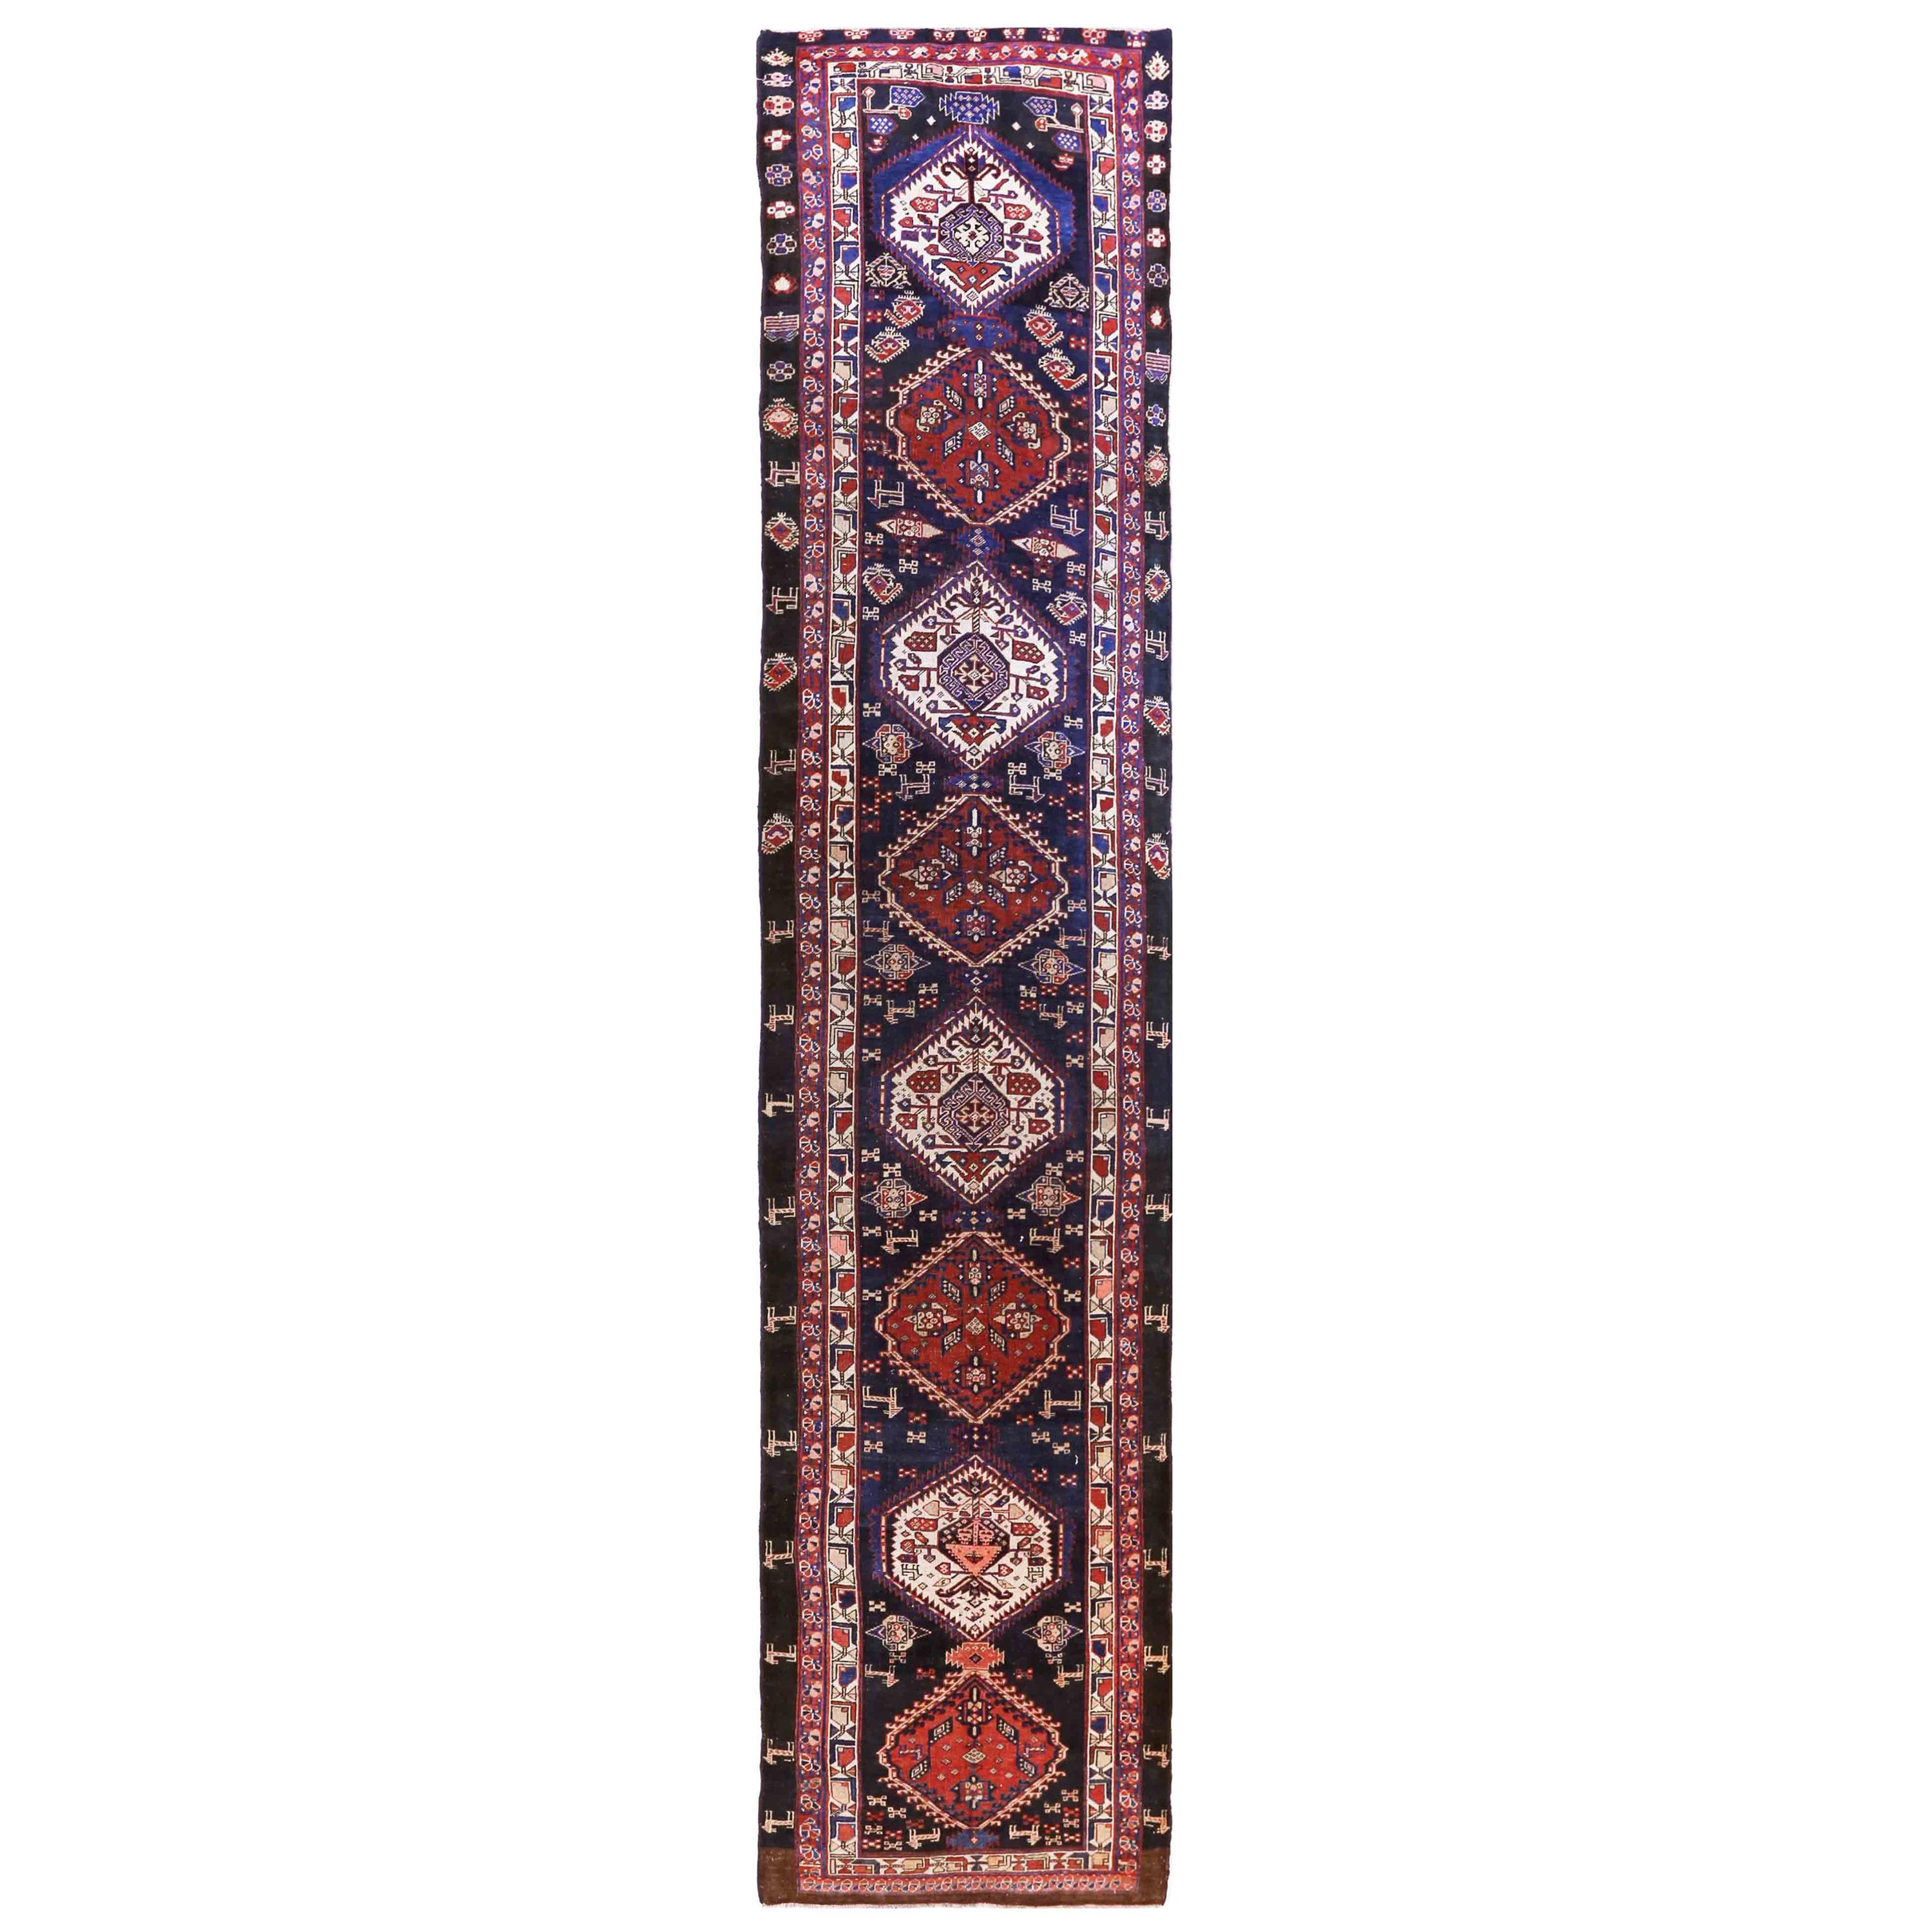 Antique Persian Rug Azerbaijan Design with Magnificent Jewel Patterns circa 1900 For Sale